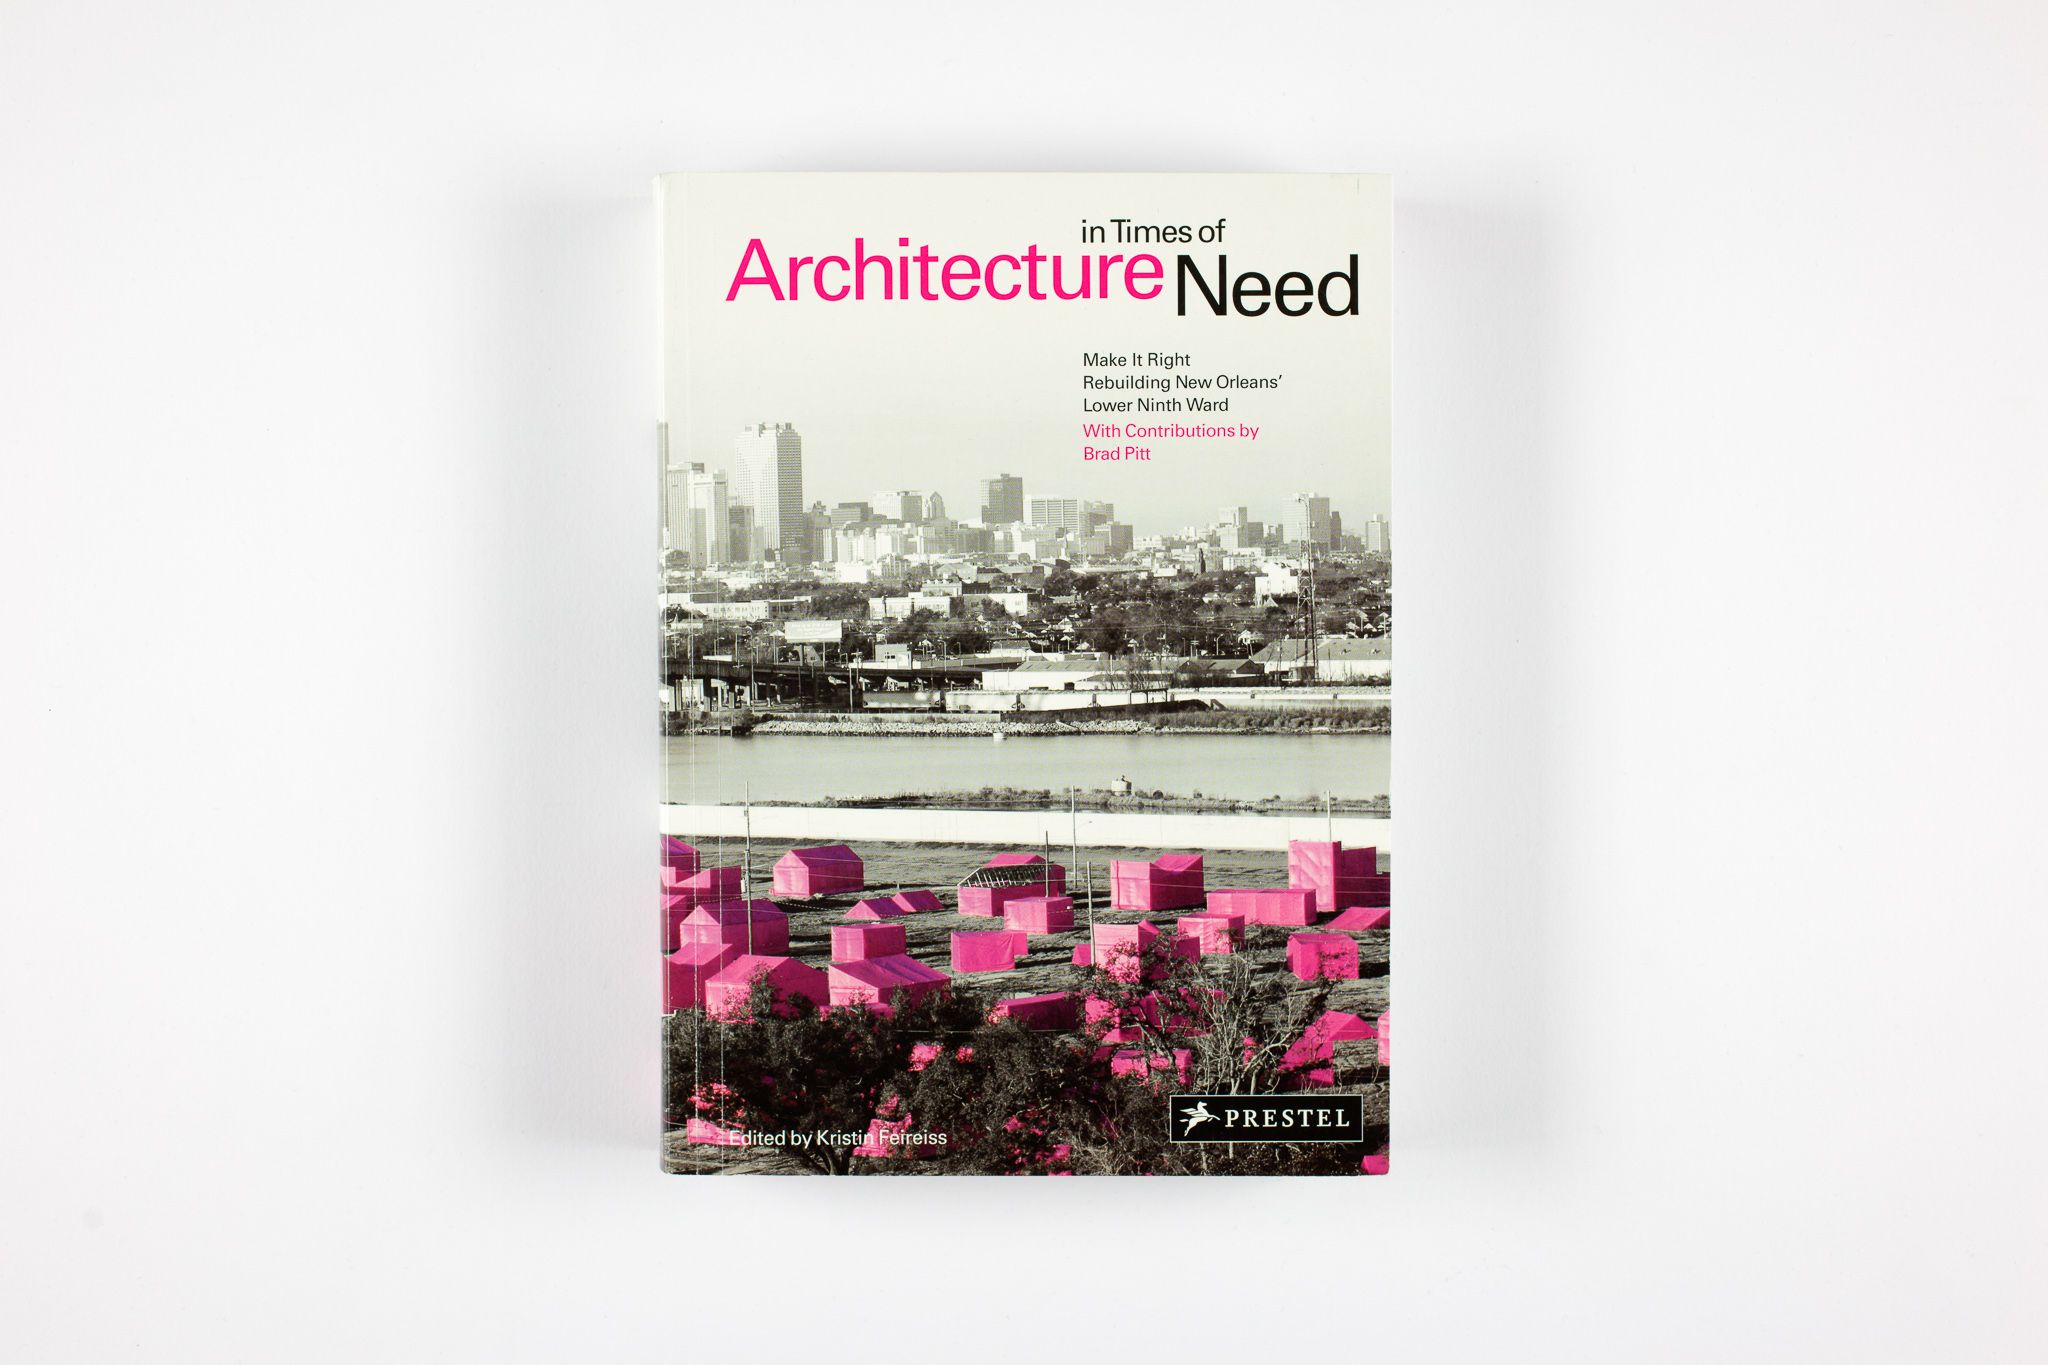 ARCHITECTURE IN THE TIMES OF NEED Project type: Book     With Contributions by: Brad Pitt     Edited by: Kristin Feireiss     Language: English     Publisher: Prestel Ltd.,1 Edition (September 28, 2009)     Paperback: 488 pages     ISBN: 978-3-7913-4276-4     Price: 29,95 EUR  About the Book